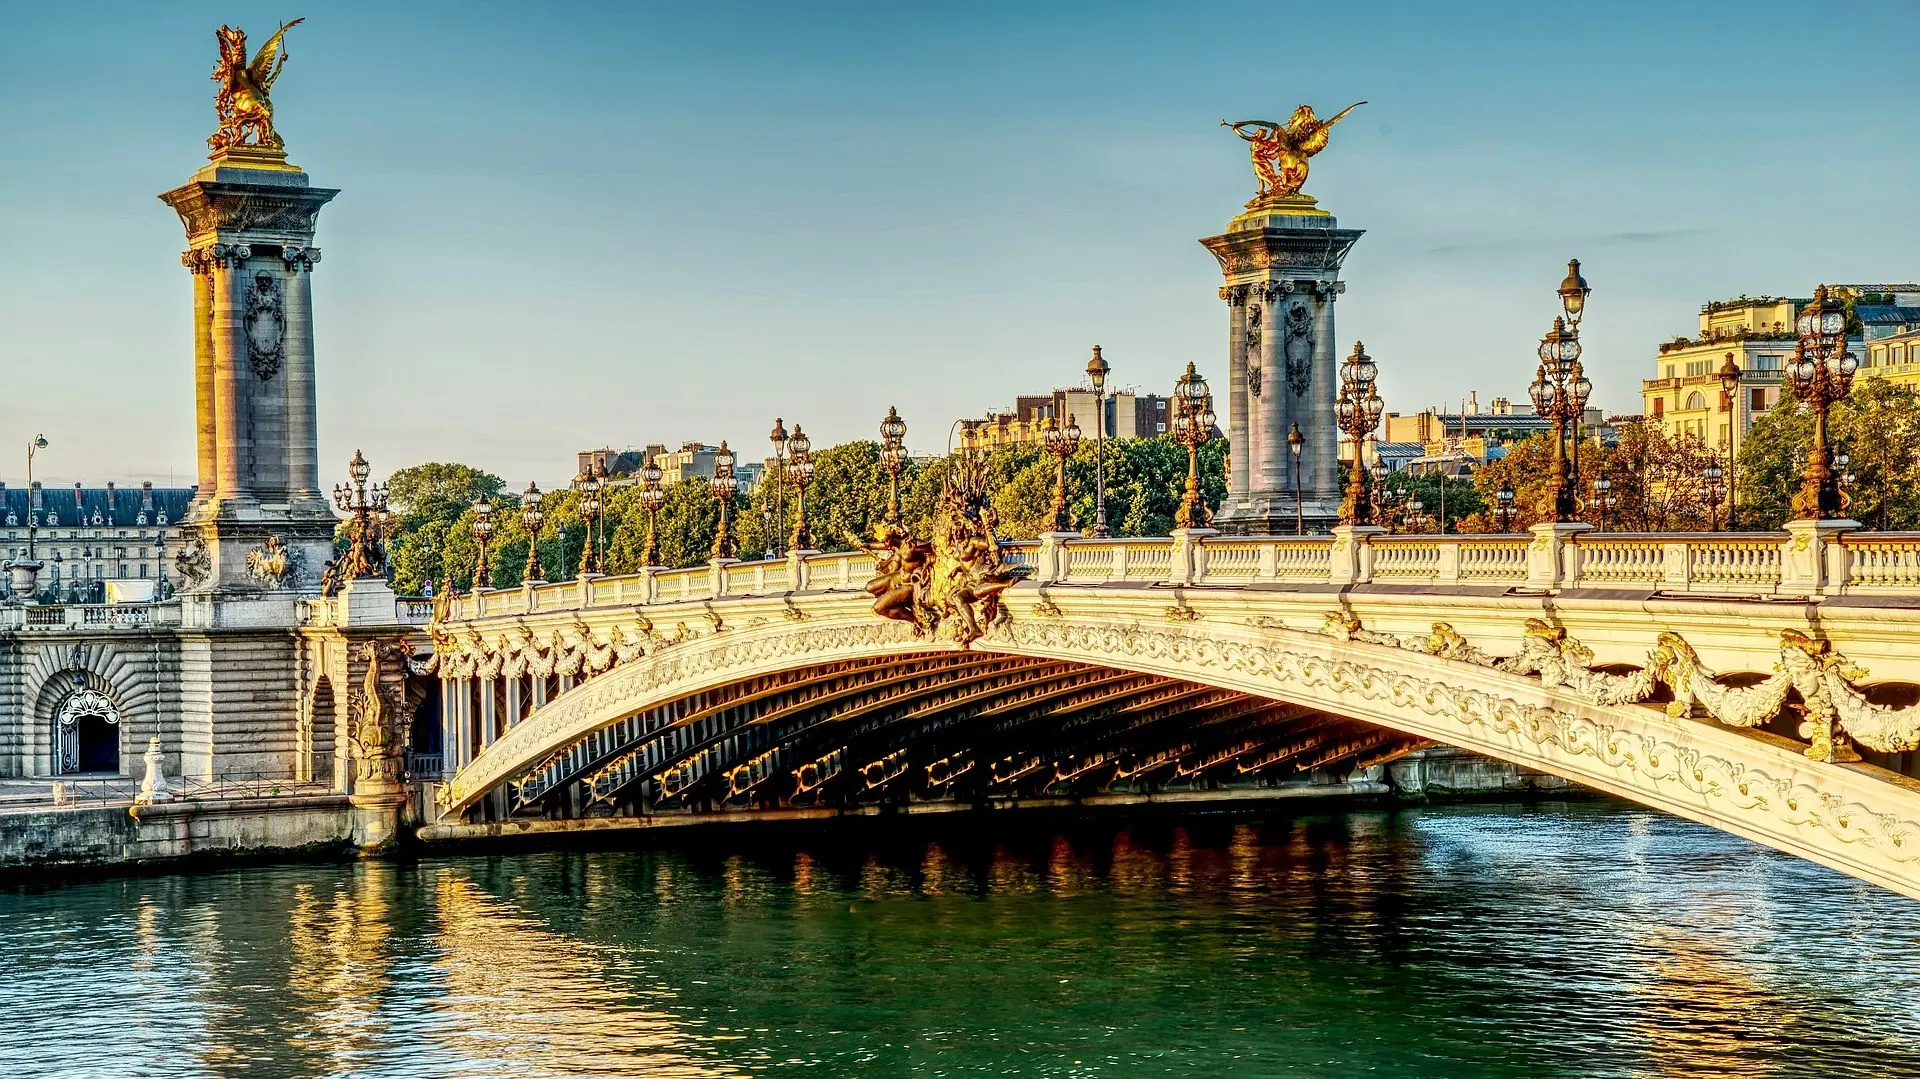 Lifestyle Toplists - Emily in Paris - her guide to the City of Light